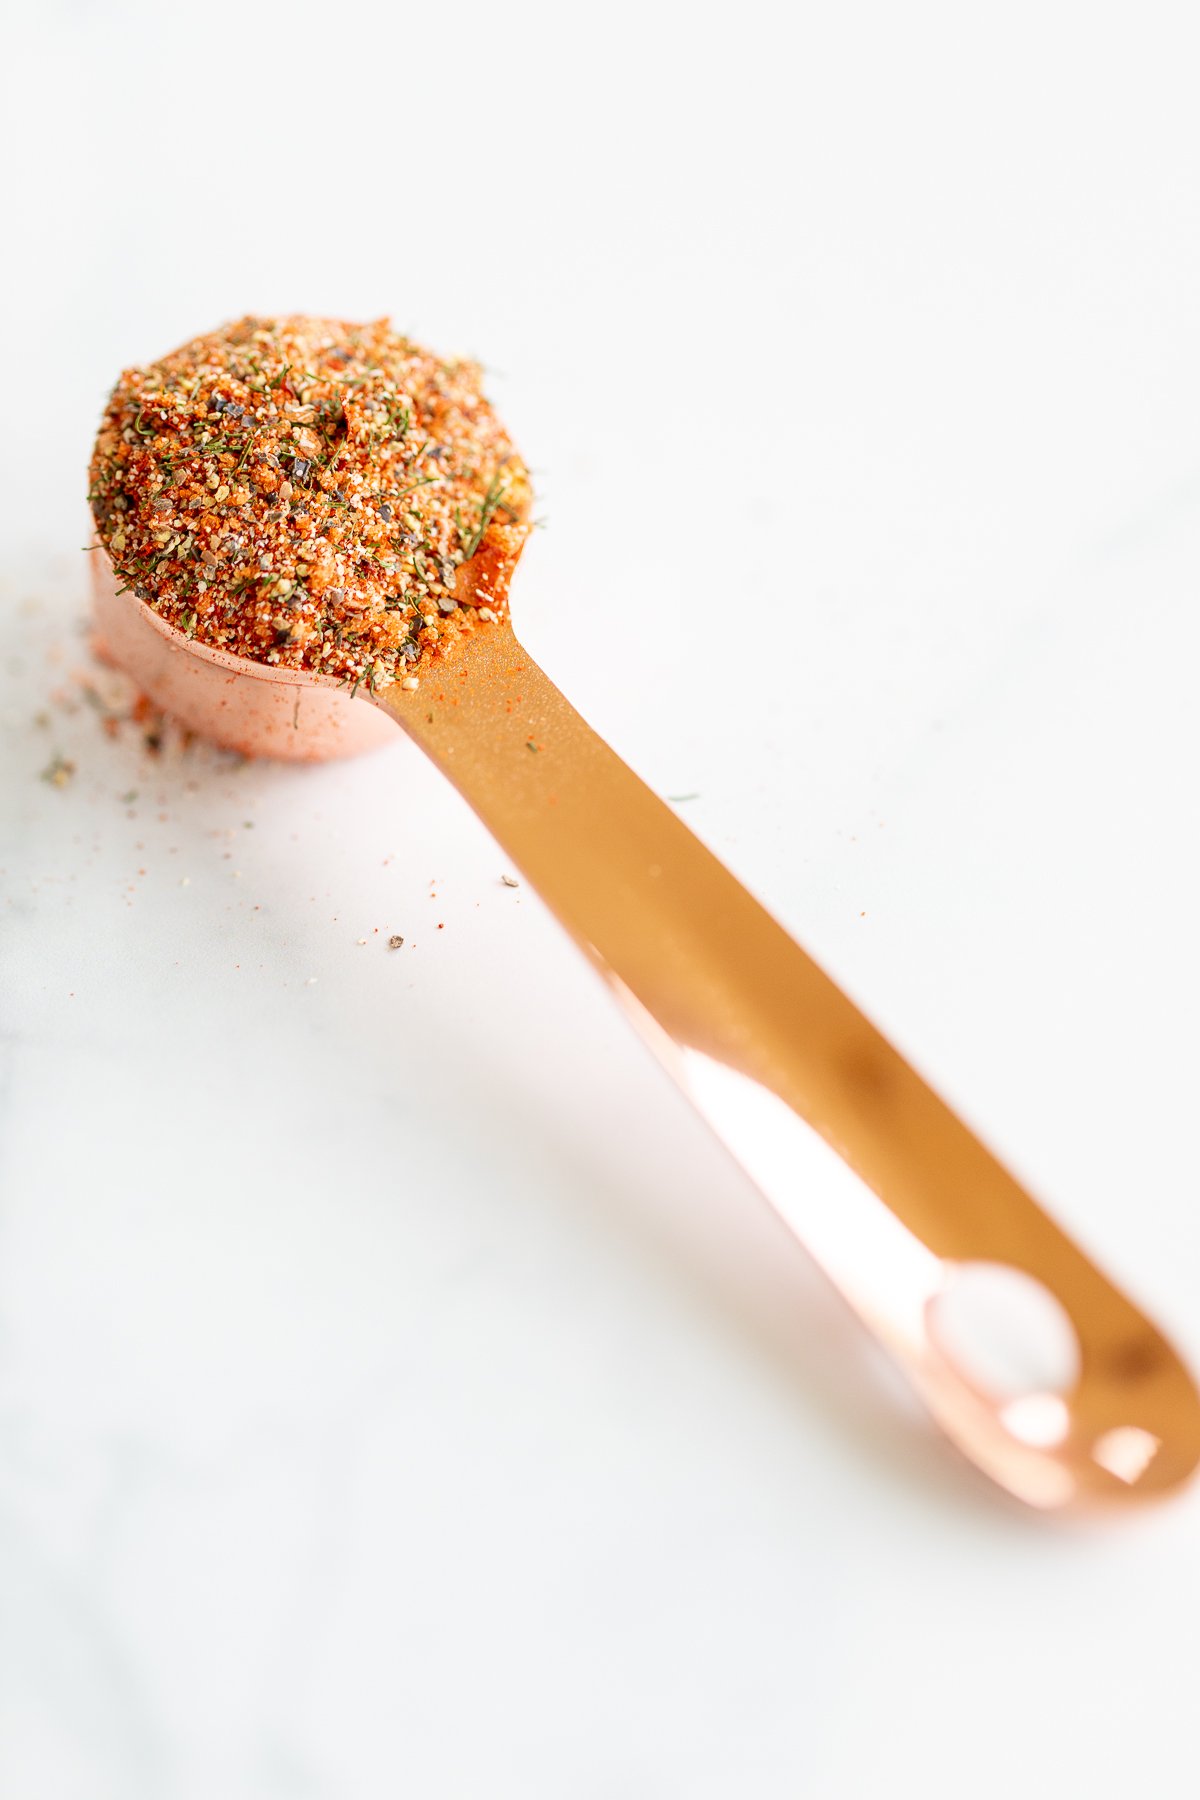 A spoon filled with the best steak seasoning on a marble countertop.